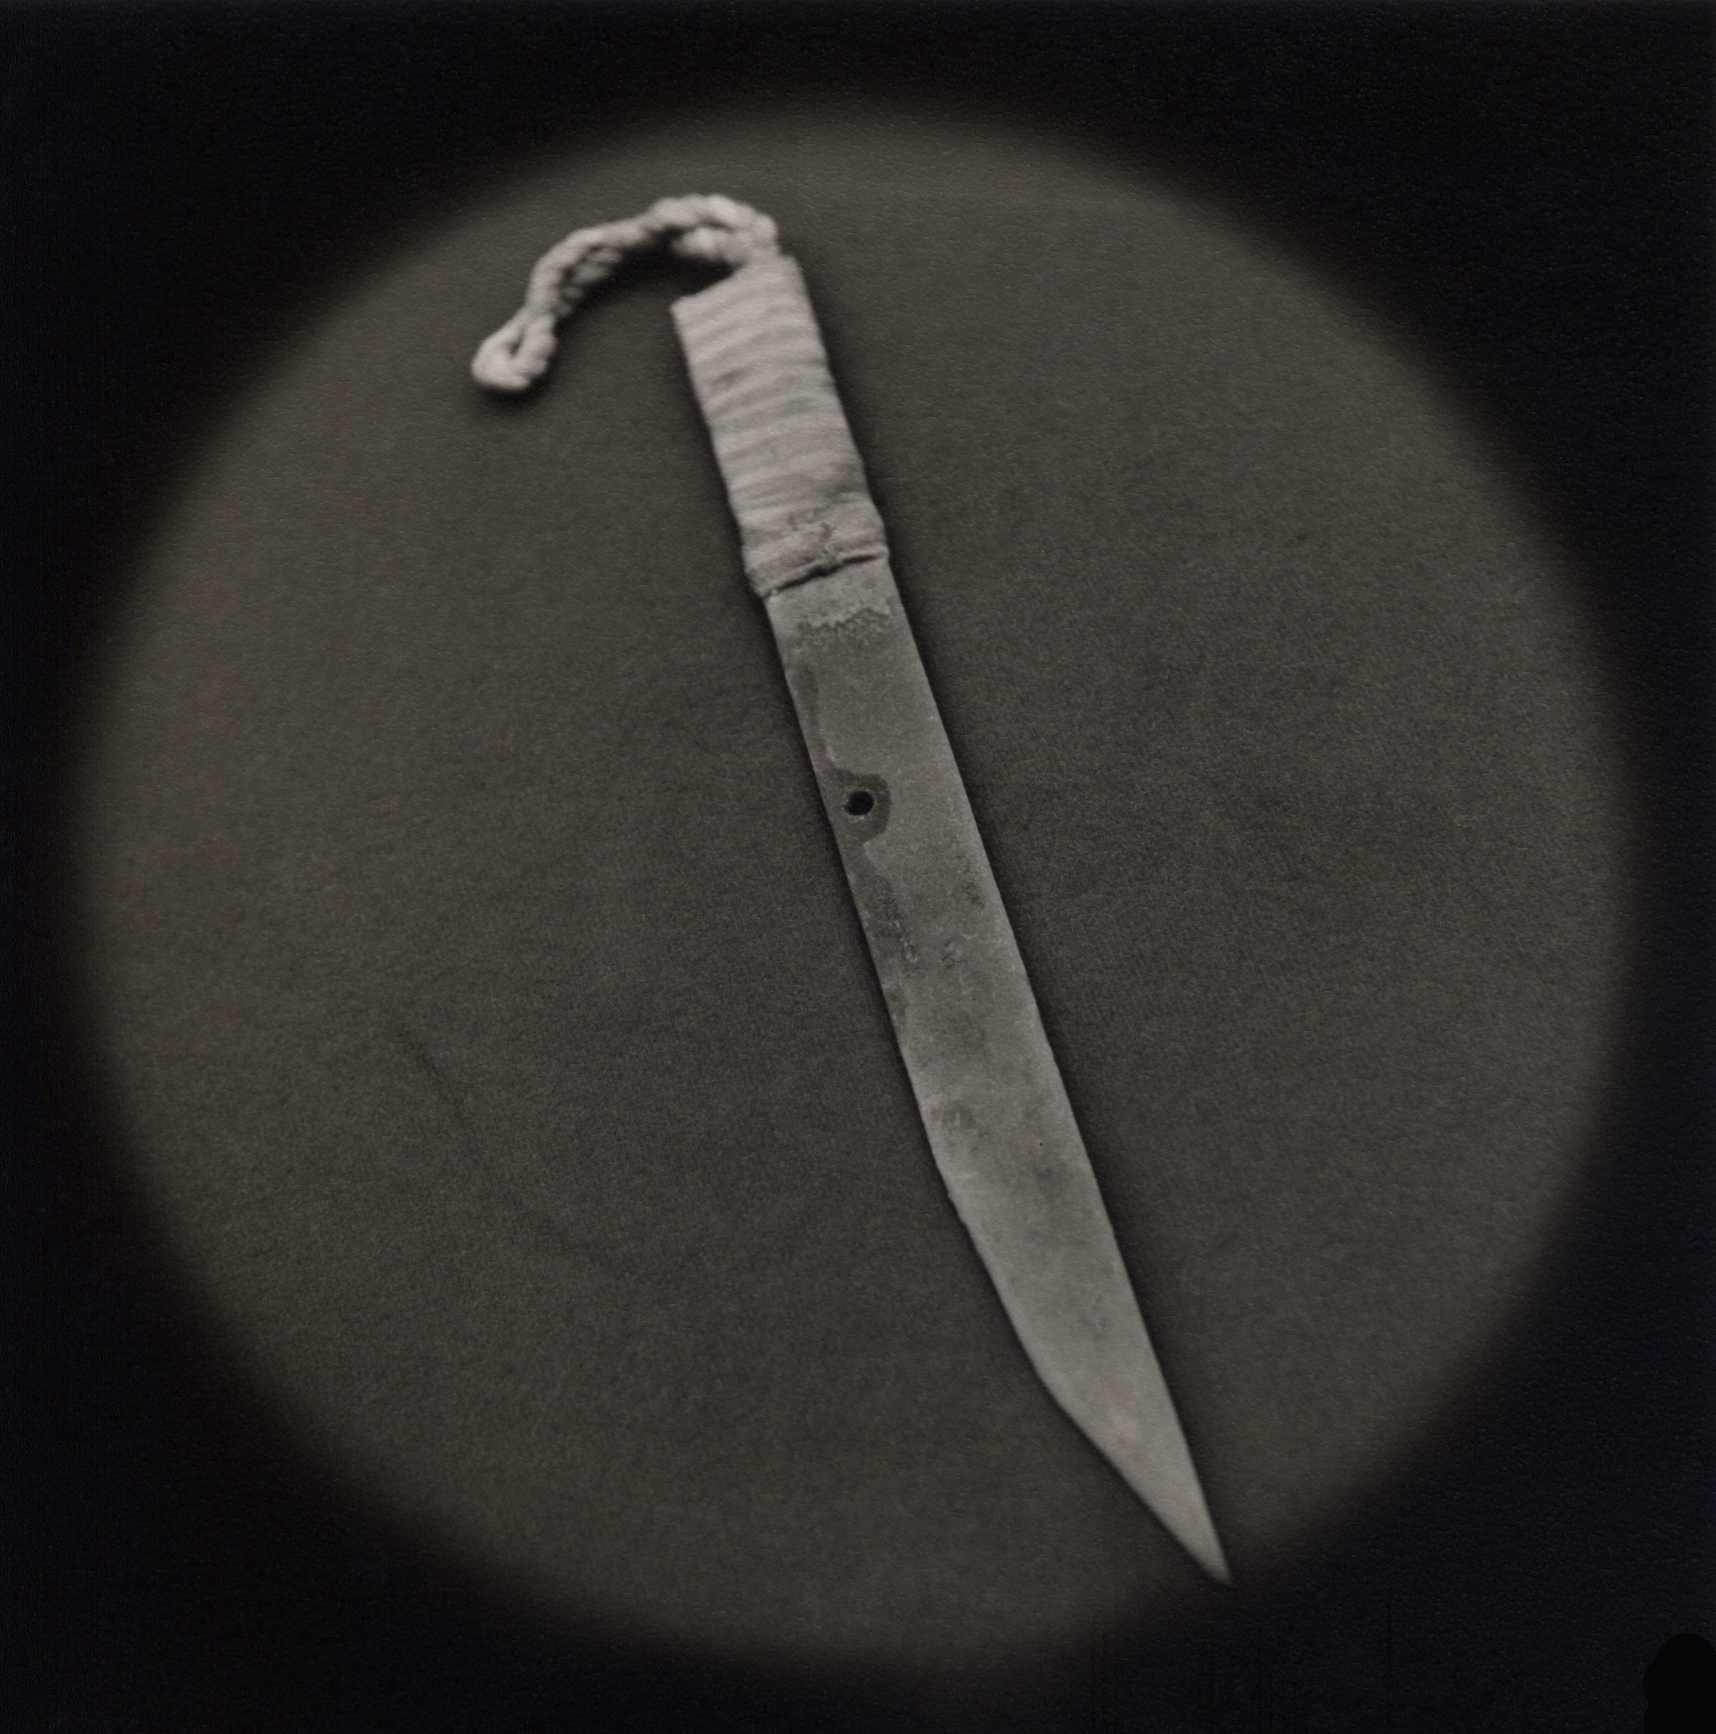   Improvised knife made from prison bed frame   Toned gelatin silver print.   16 x 16 in. (40 x 40 cm.) 